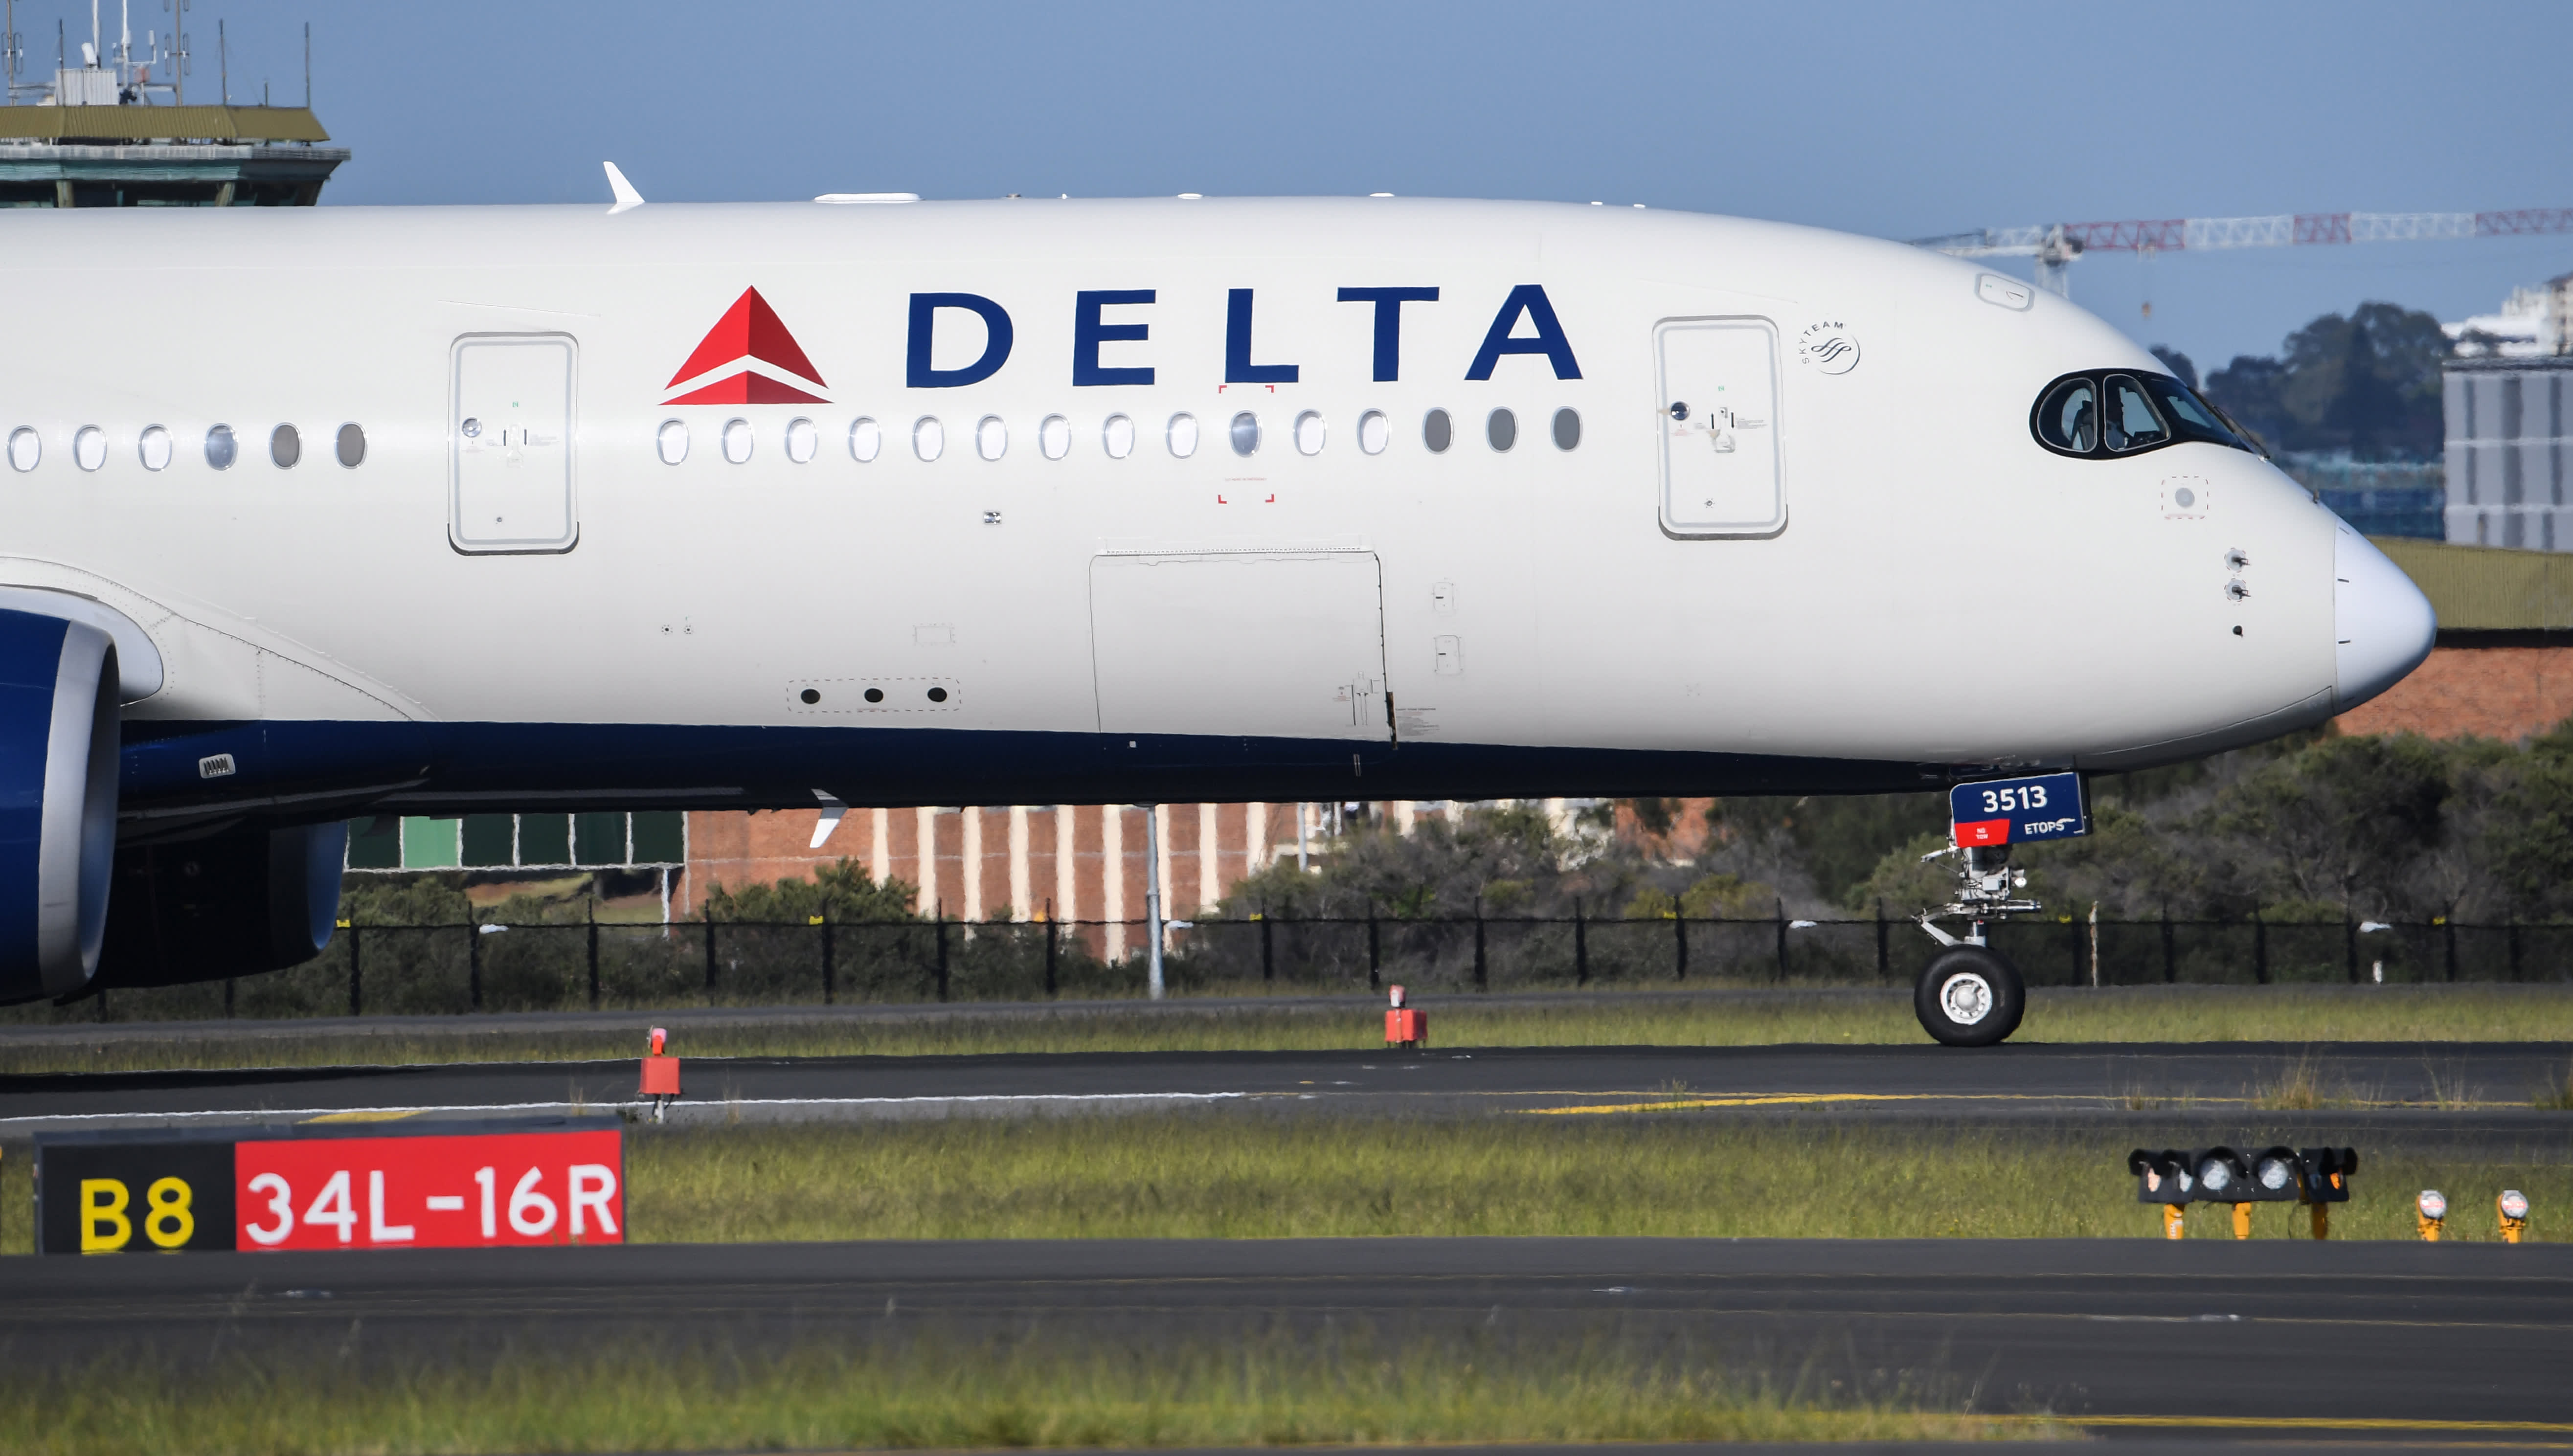 Delta expects omicron will drive quarterly loss but forecasts 2022 profit on travel rebound – CNBC